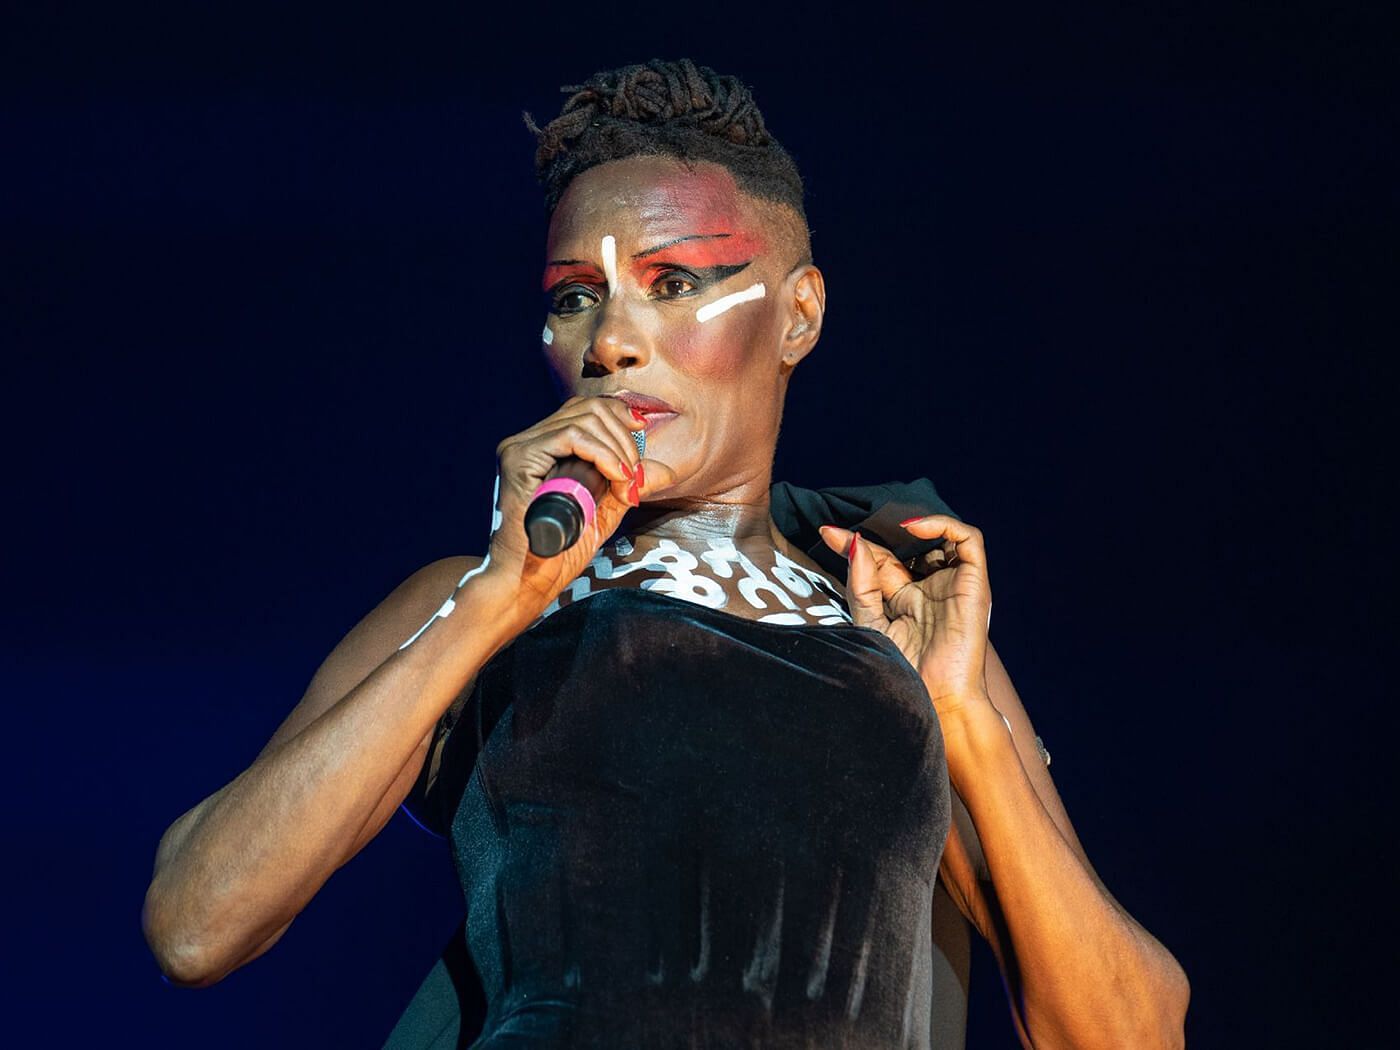 Grace Jones performing on a tour (Image via Lorne Thomson/Getty Images)